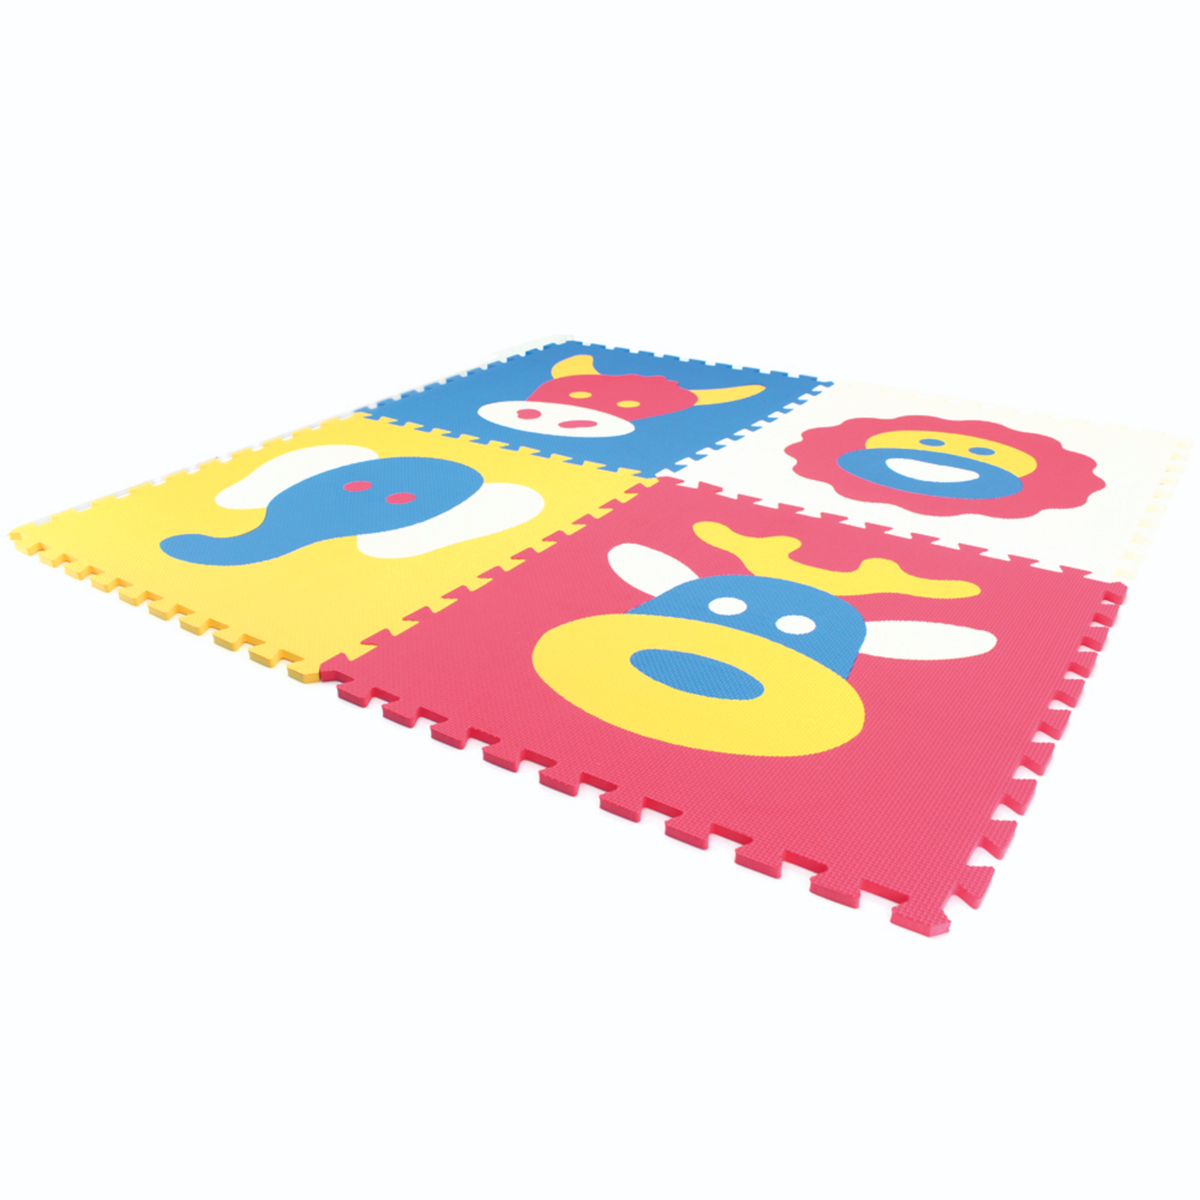 Sunta Puzzle Mat, Pack of 4, Multicolor, Assorted, 2115/10B3-A